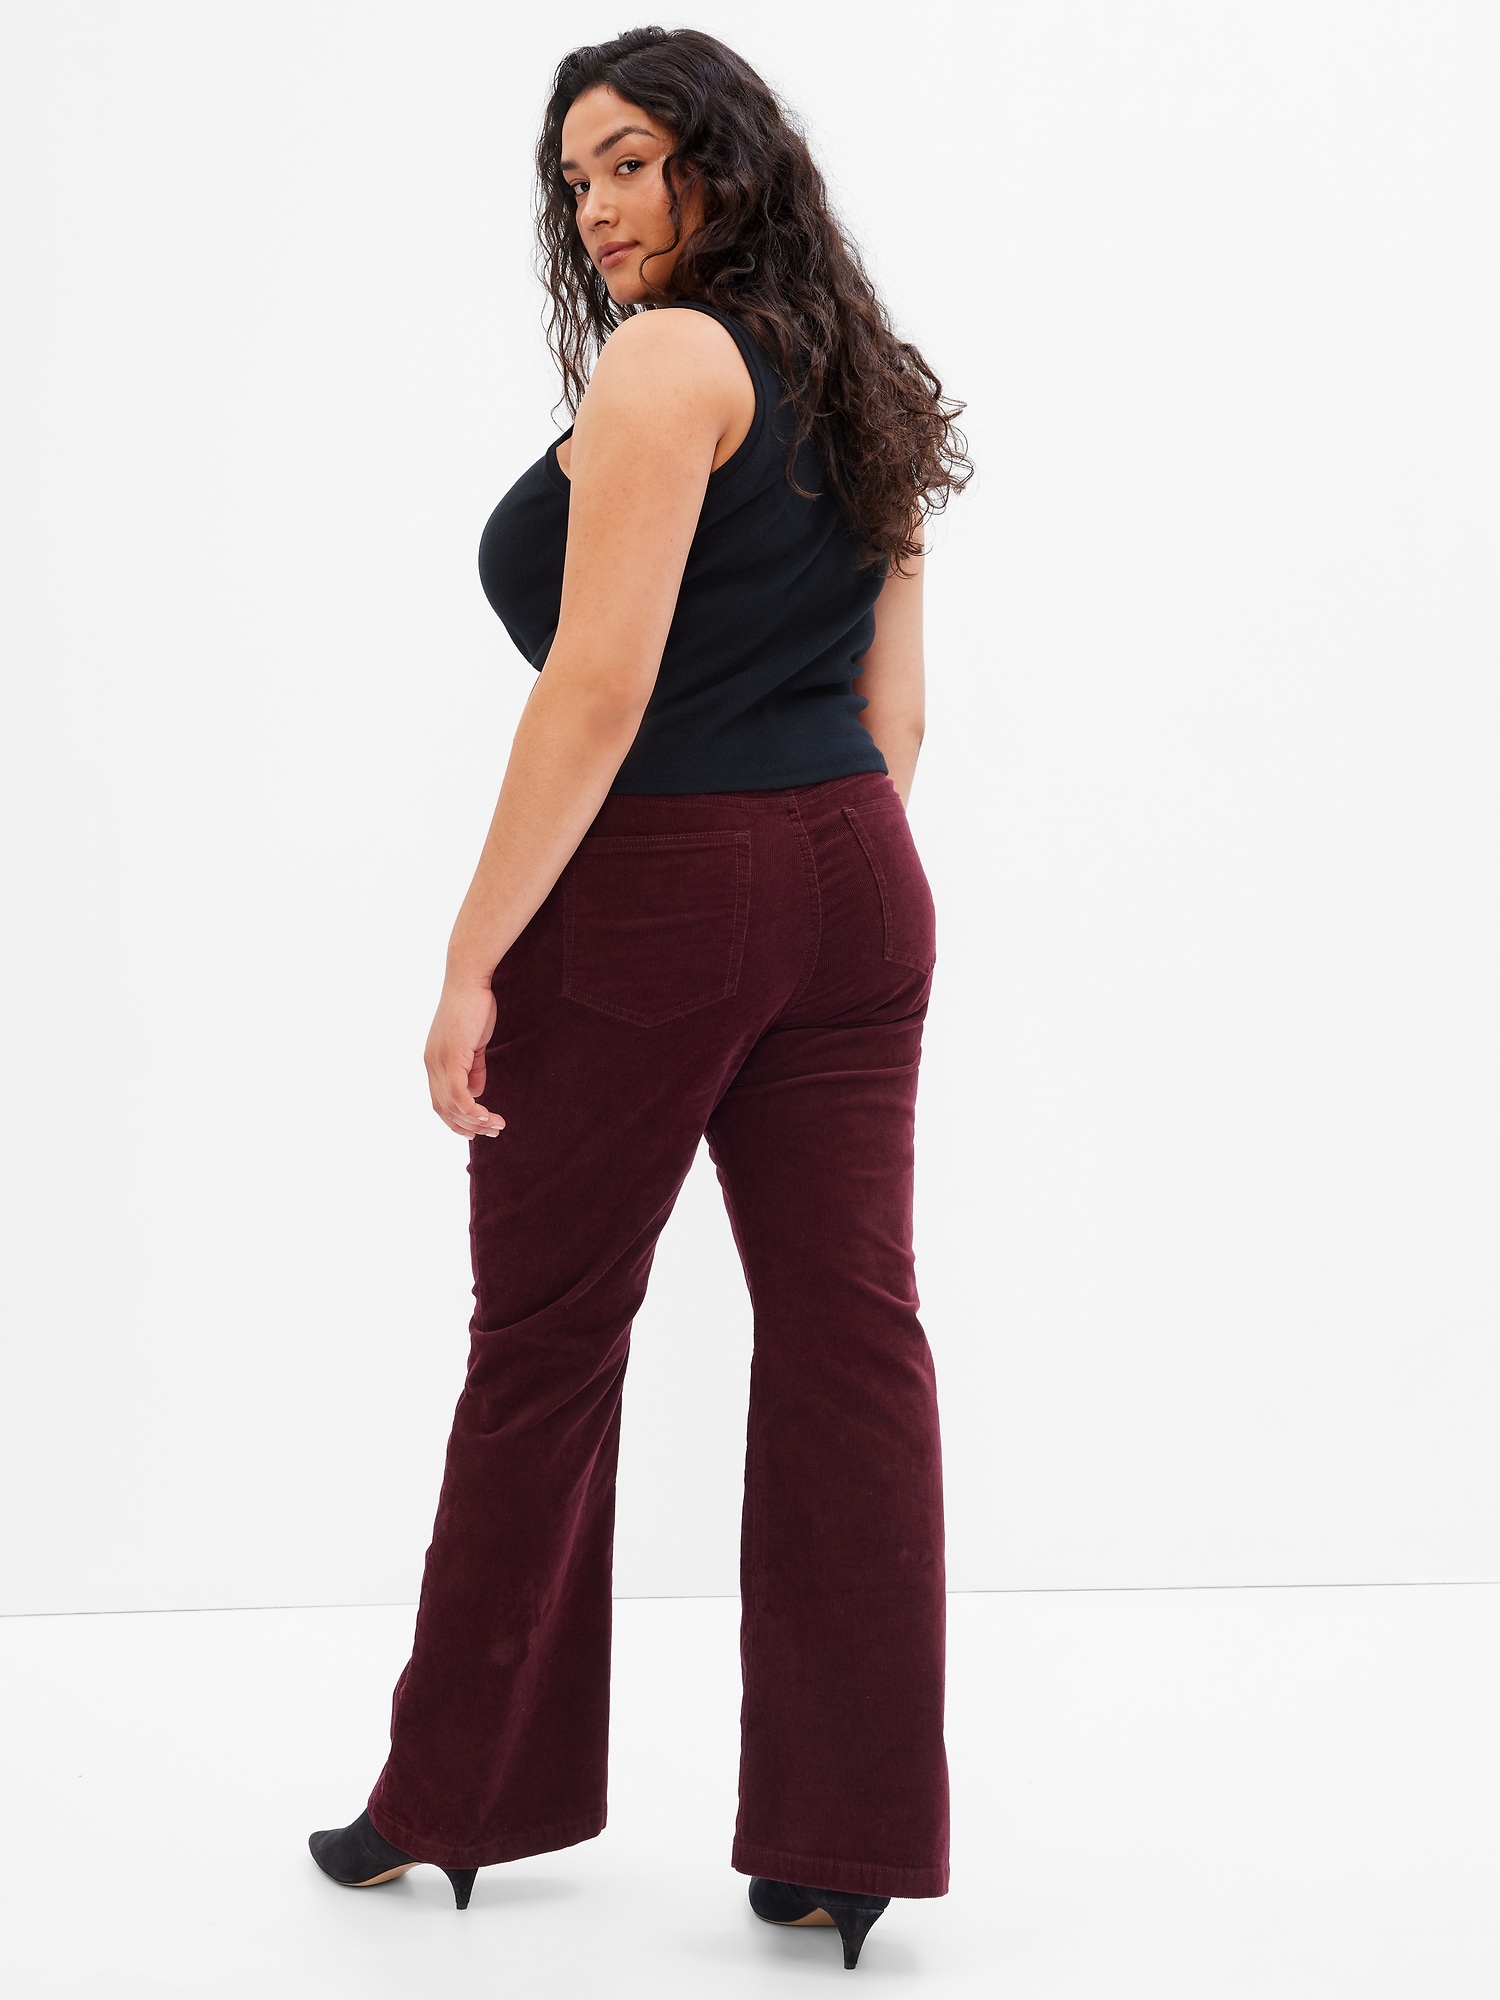 ASOS DESIGN stretch flare jeans in dark brown corduroy - part of a